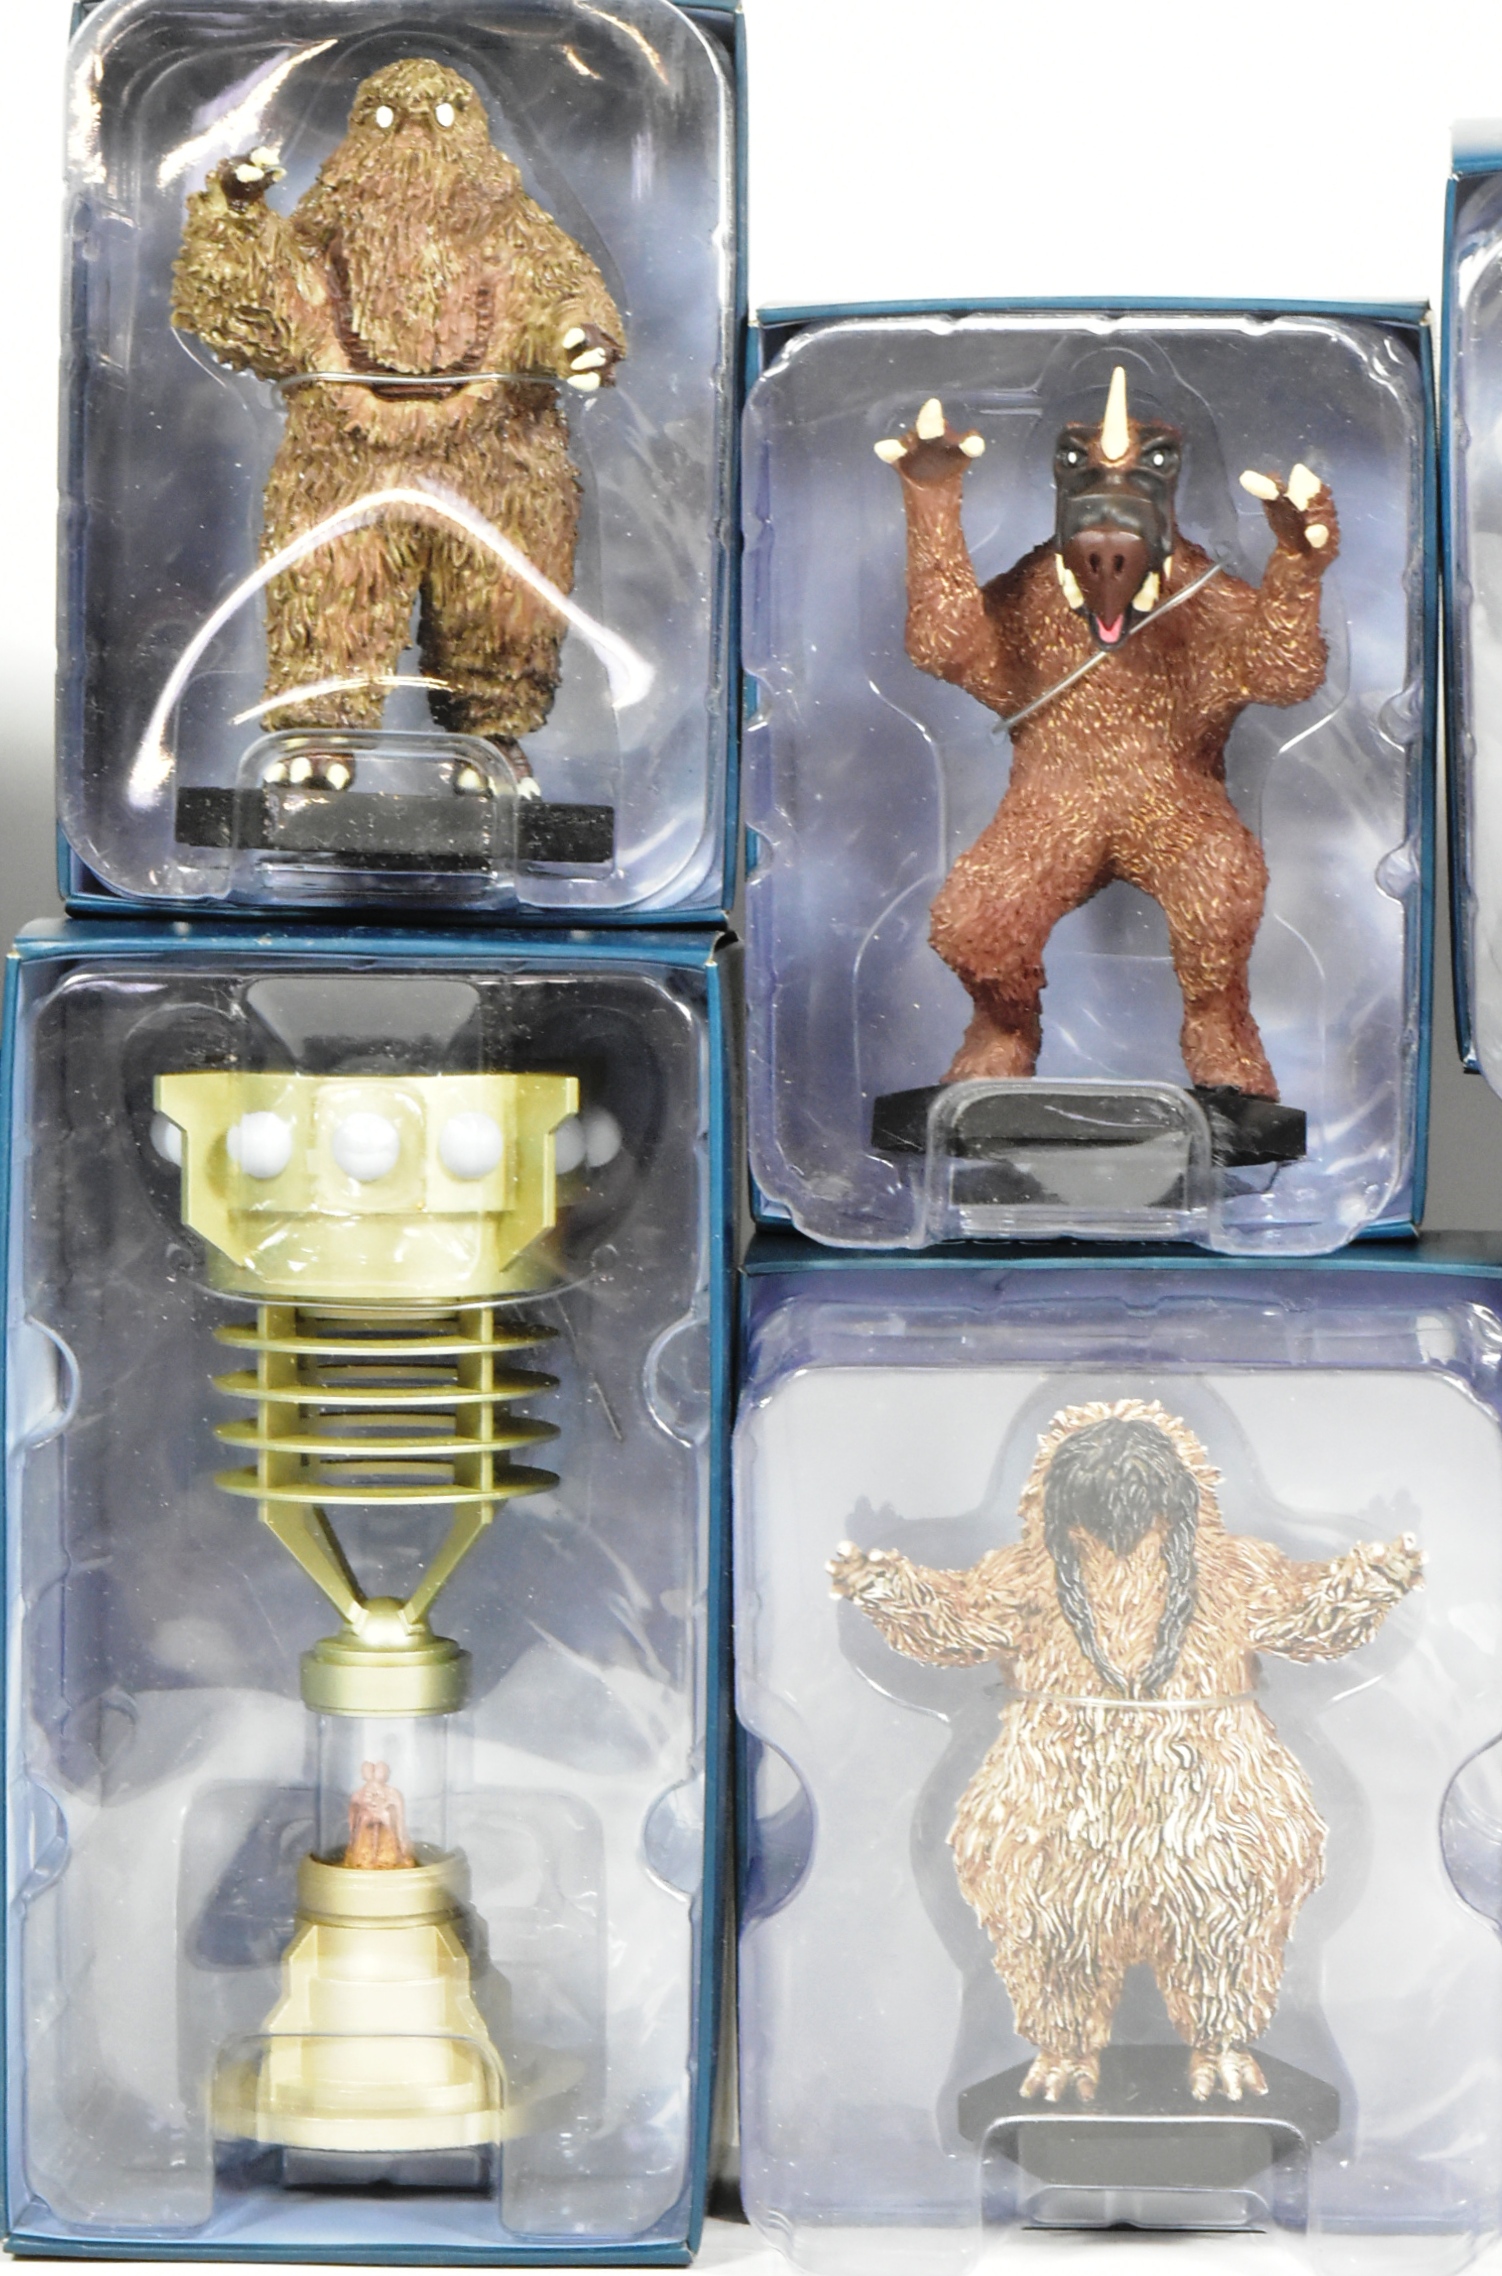 DOCTOR WHO - EAGLE MOSS - DIECAST METAL FIGURES - Image 3 of 5